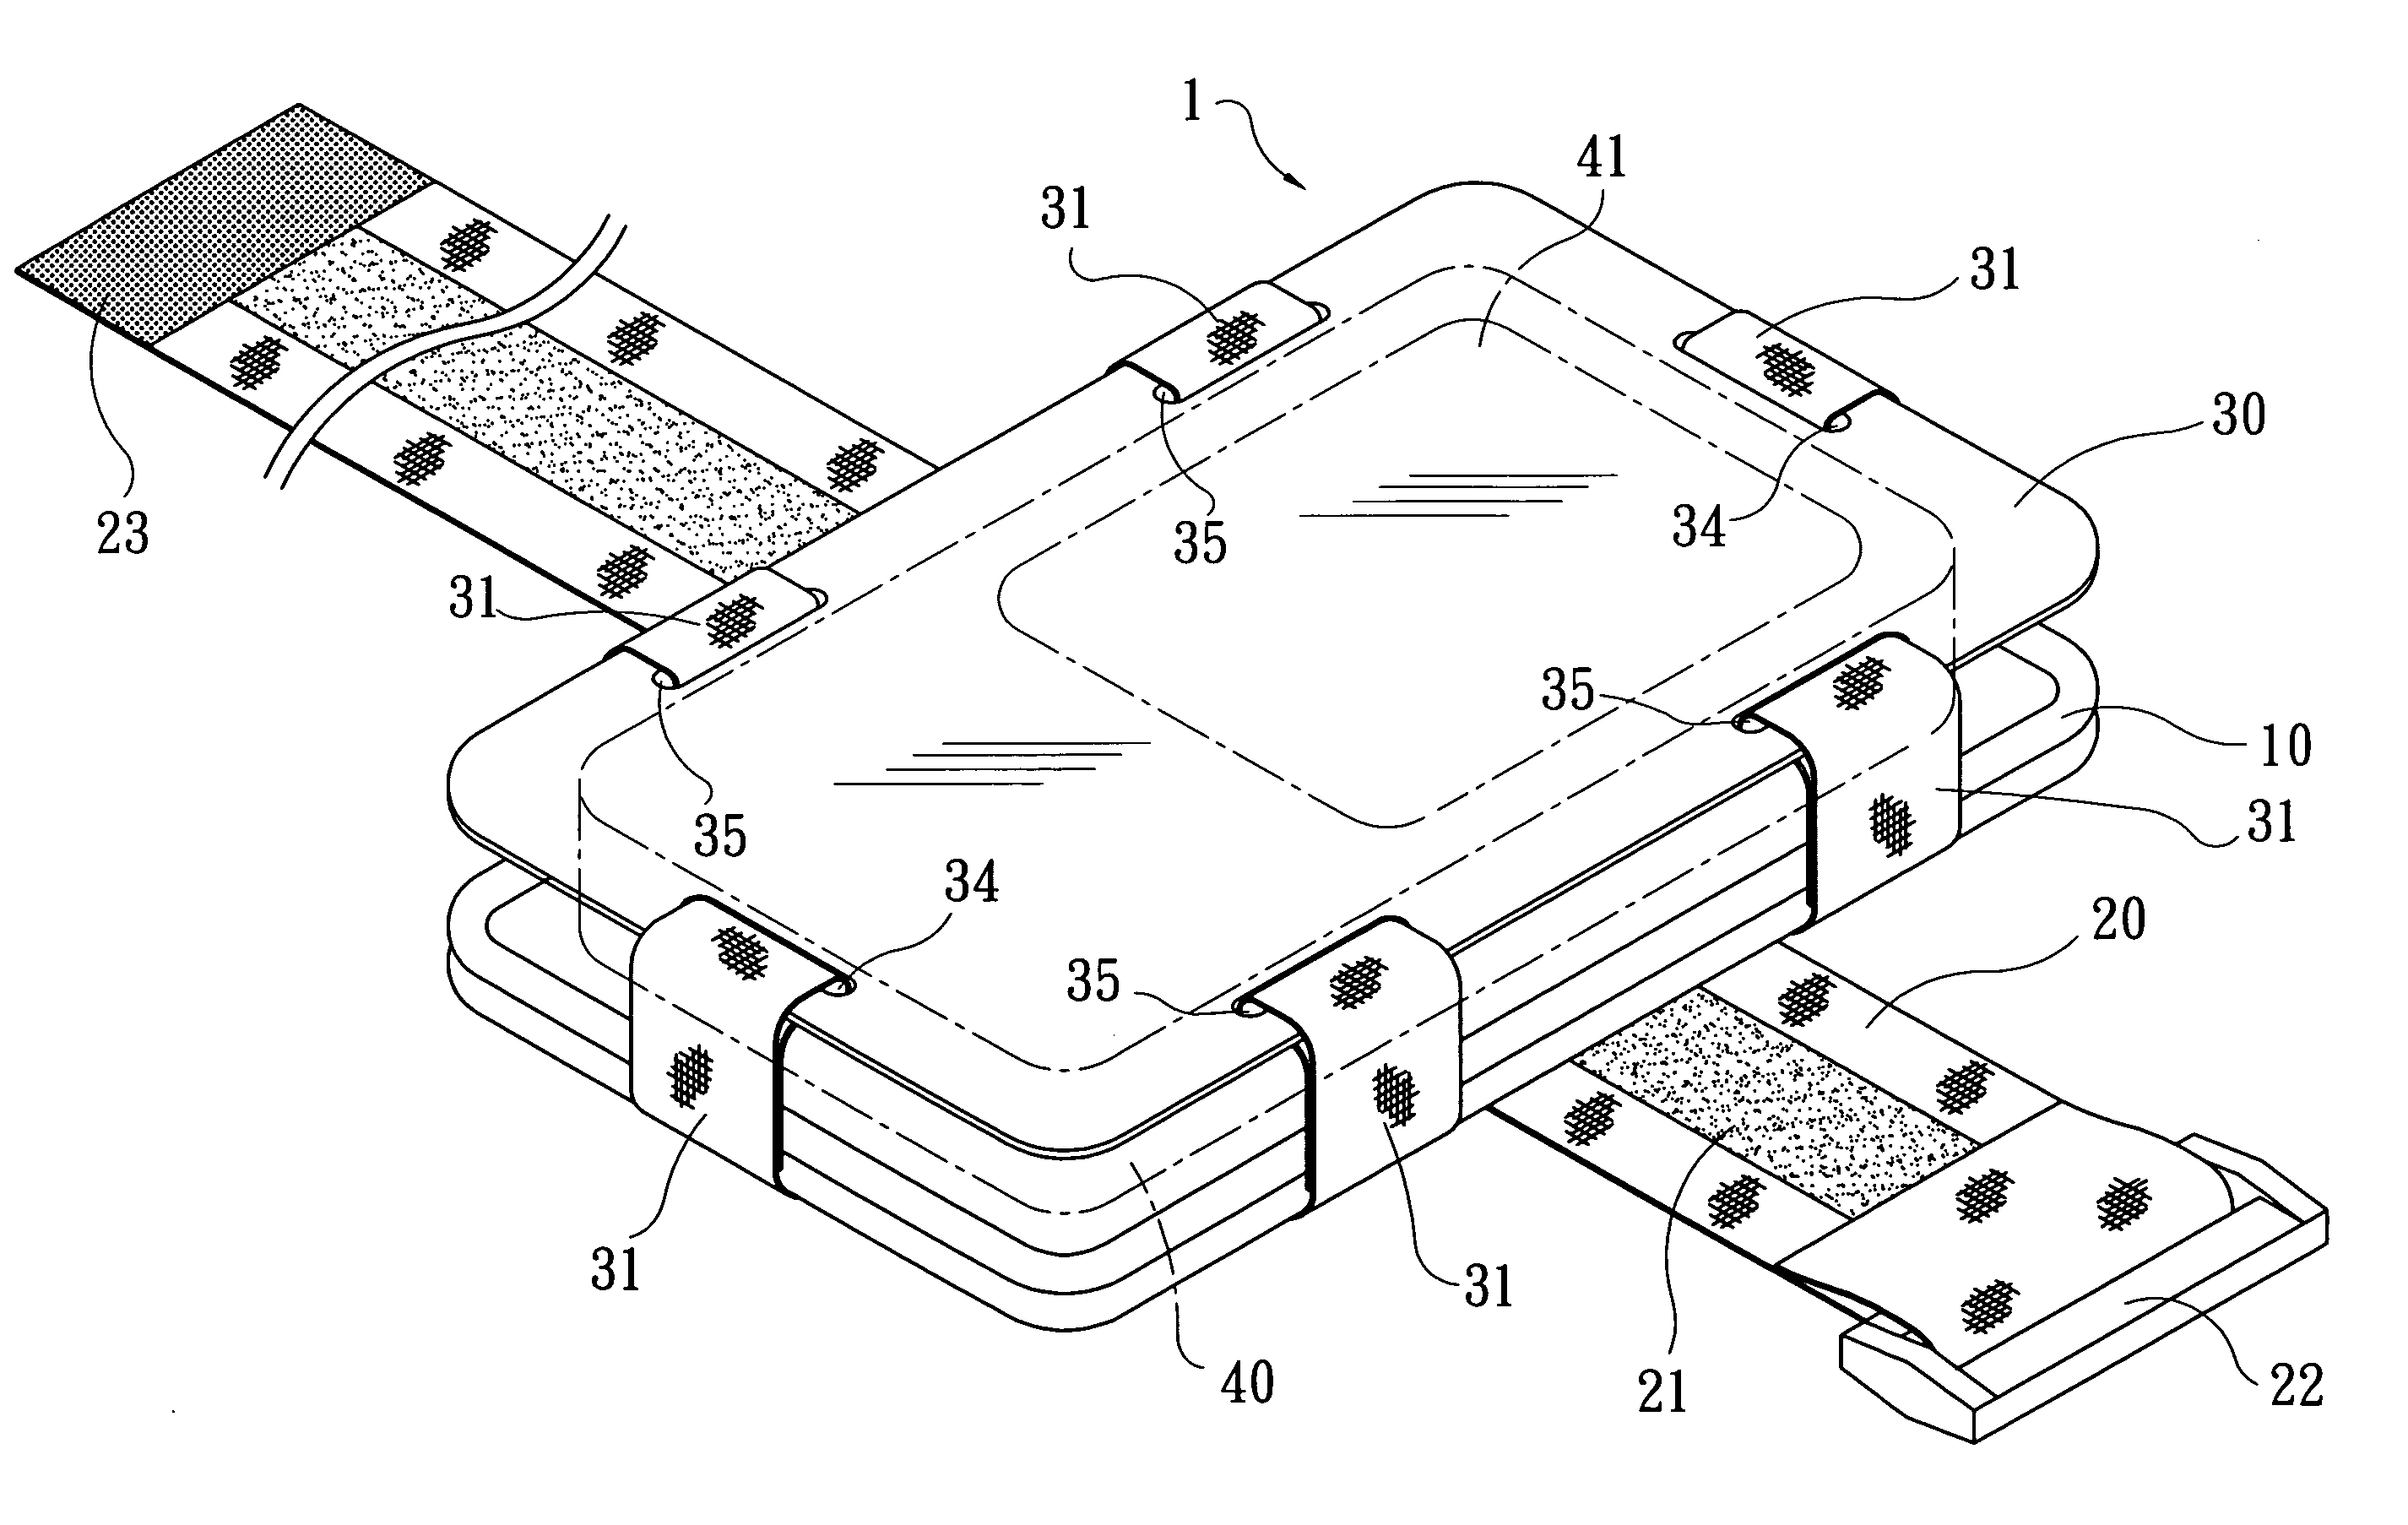 Carrier for handheld device